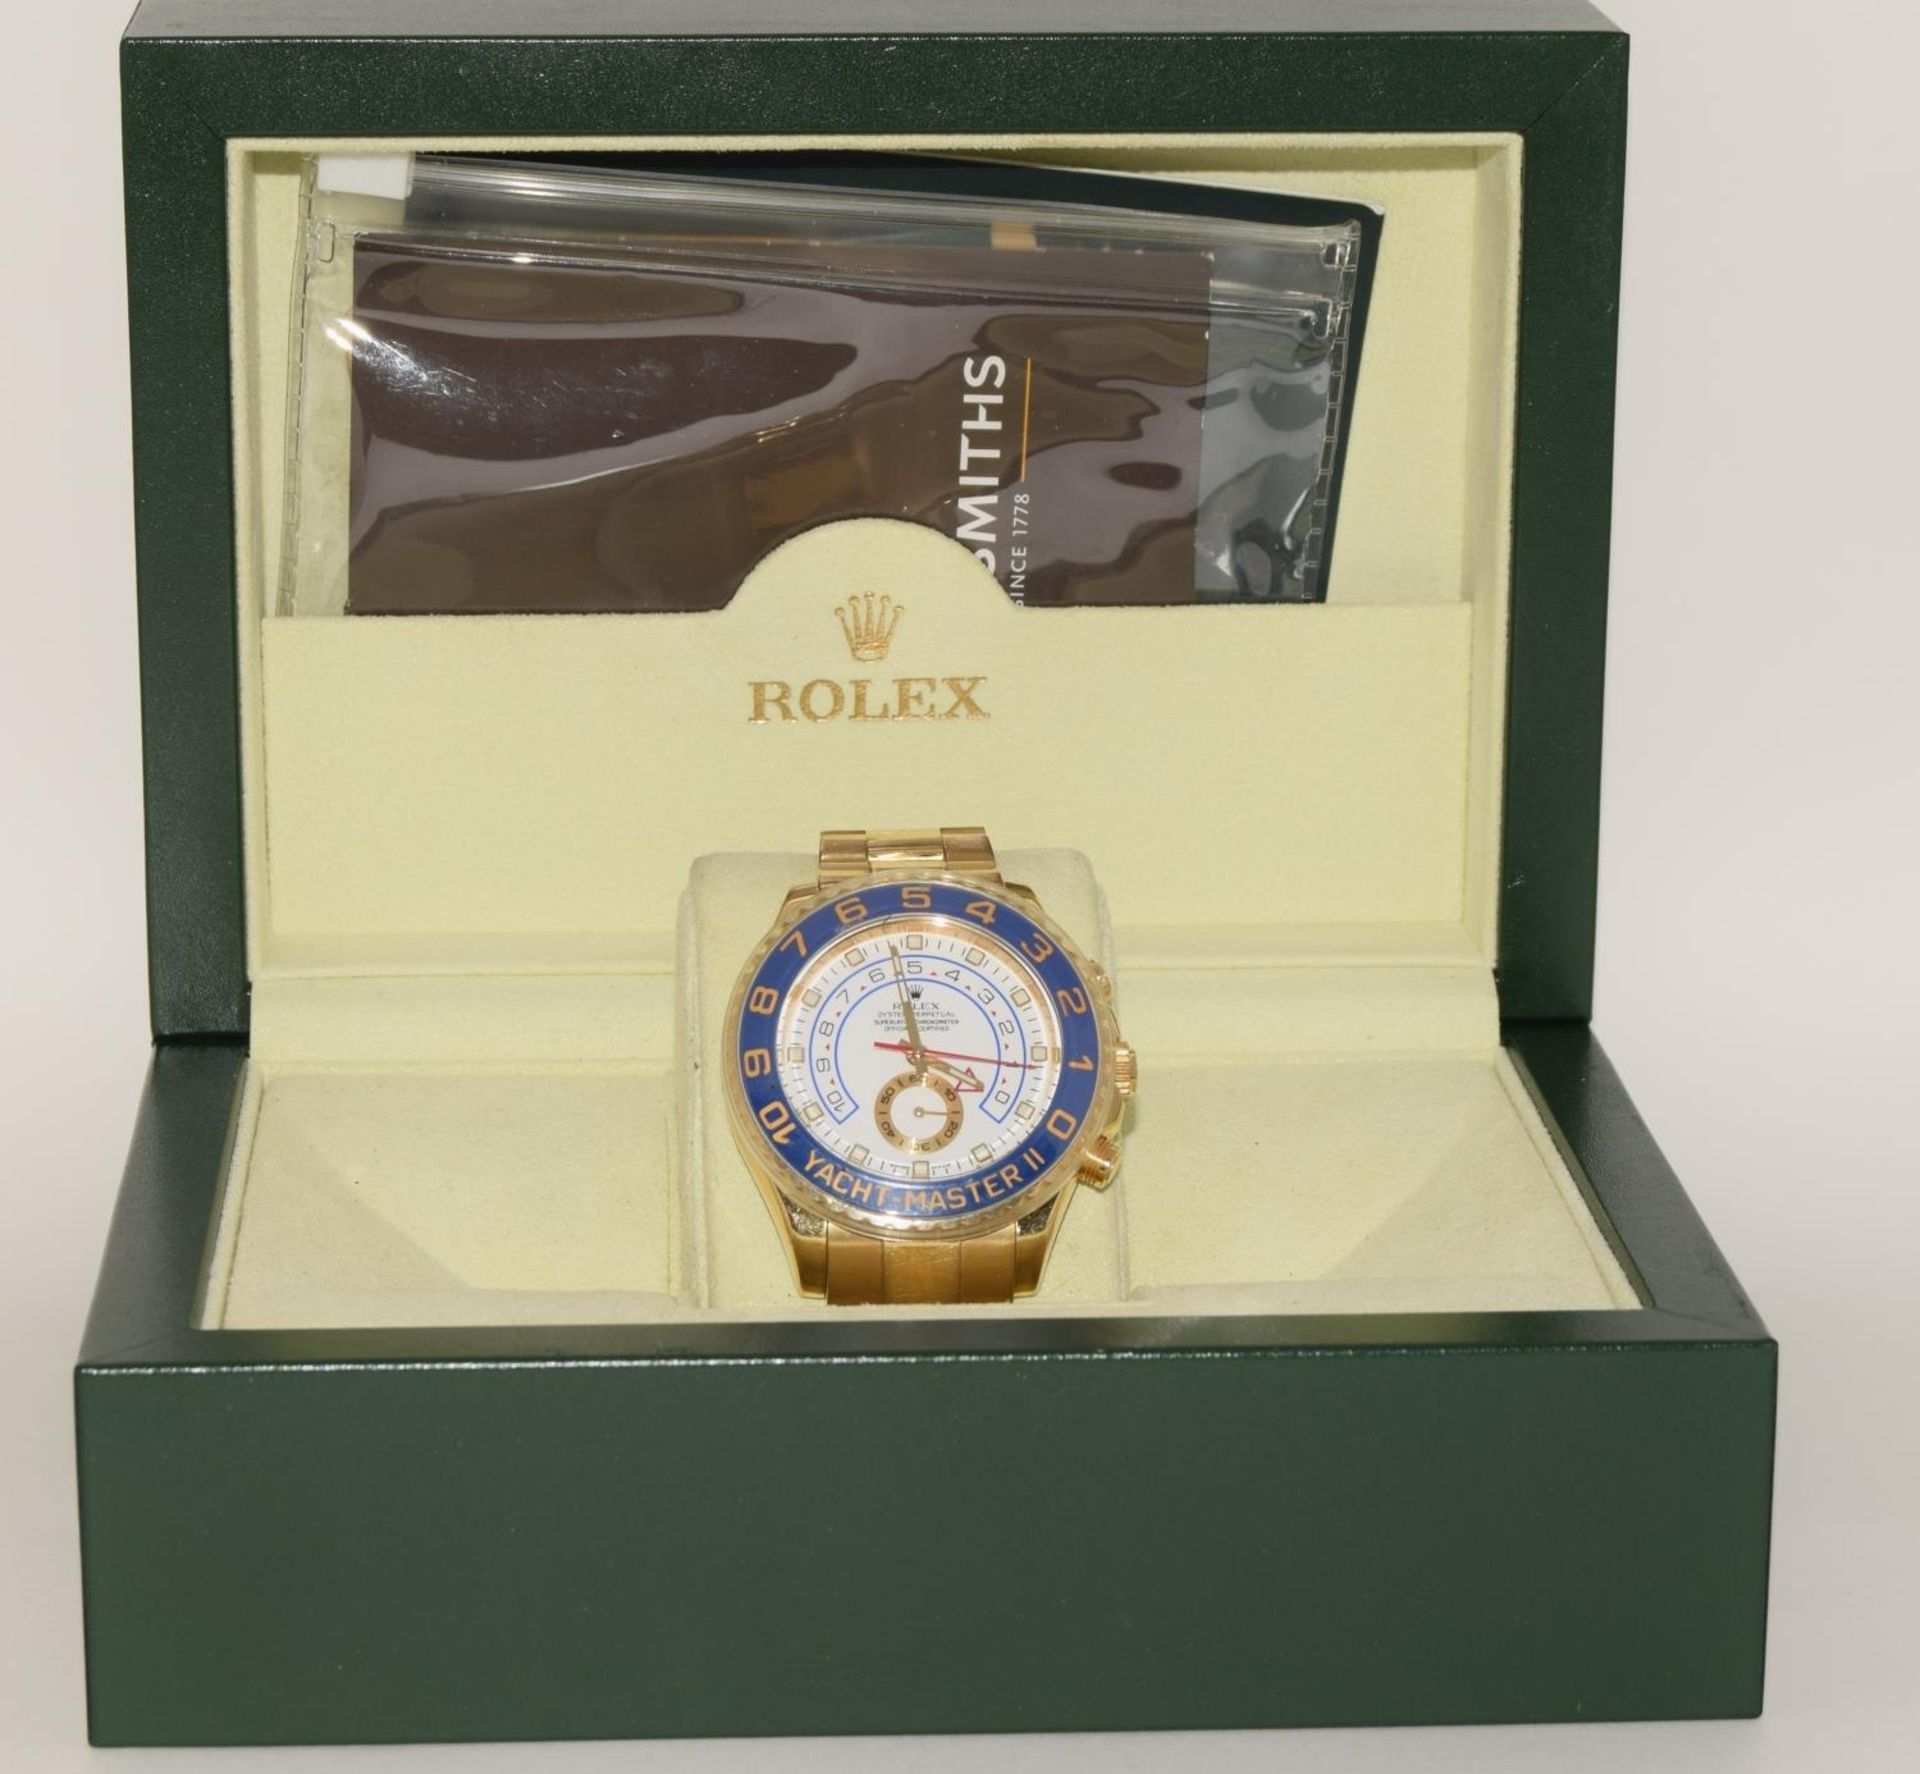 Rolex Yacht Master II, 18ct gold model 116688, Boxed and papers 2012. (ref 30) - Image 9 of 10